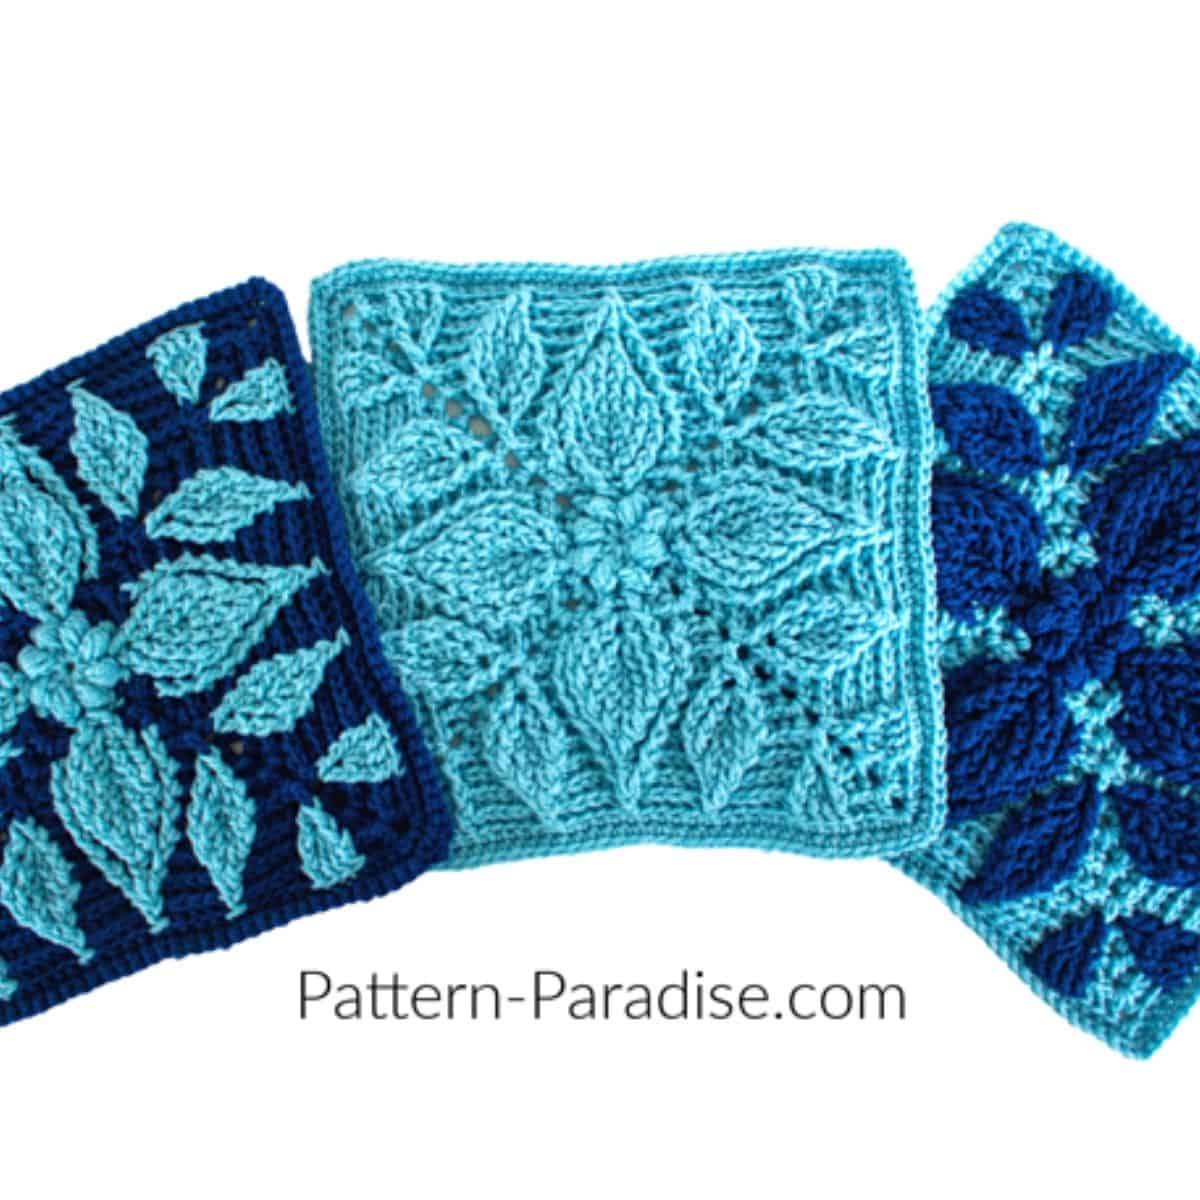 three crochet granny squares in shades of blue with a raised flower or snowflake motif